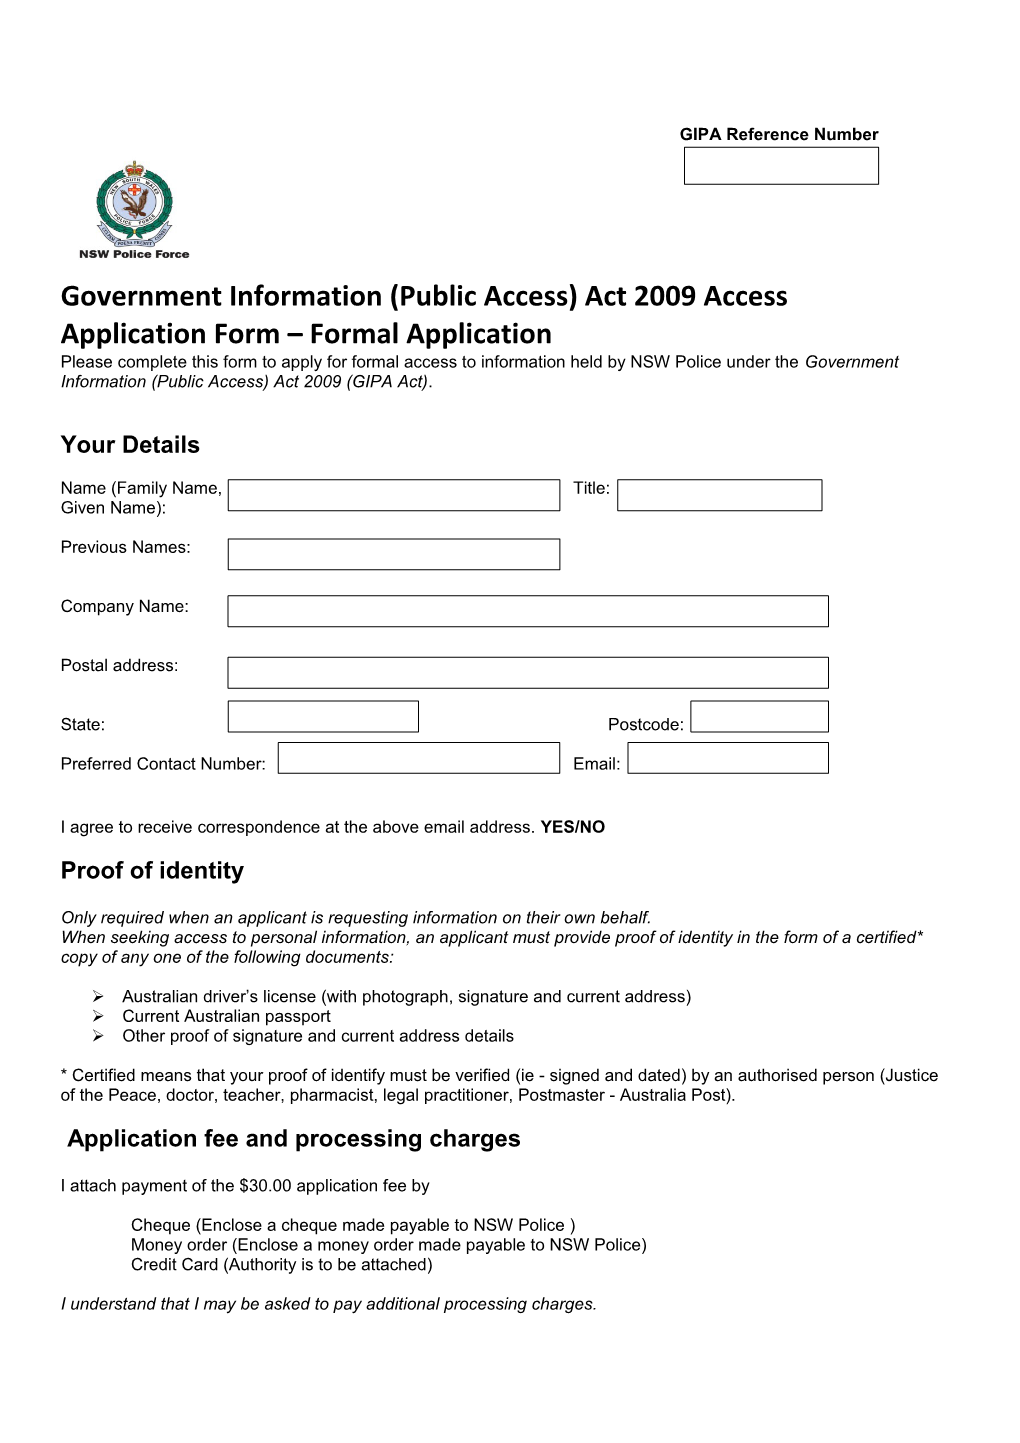 Formal Access Application Form